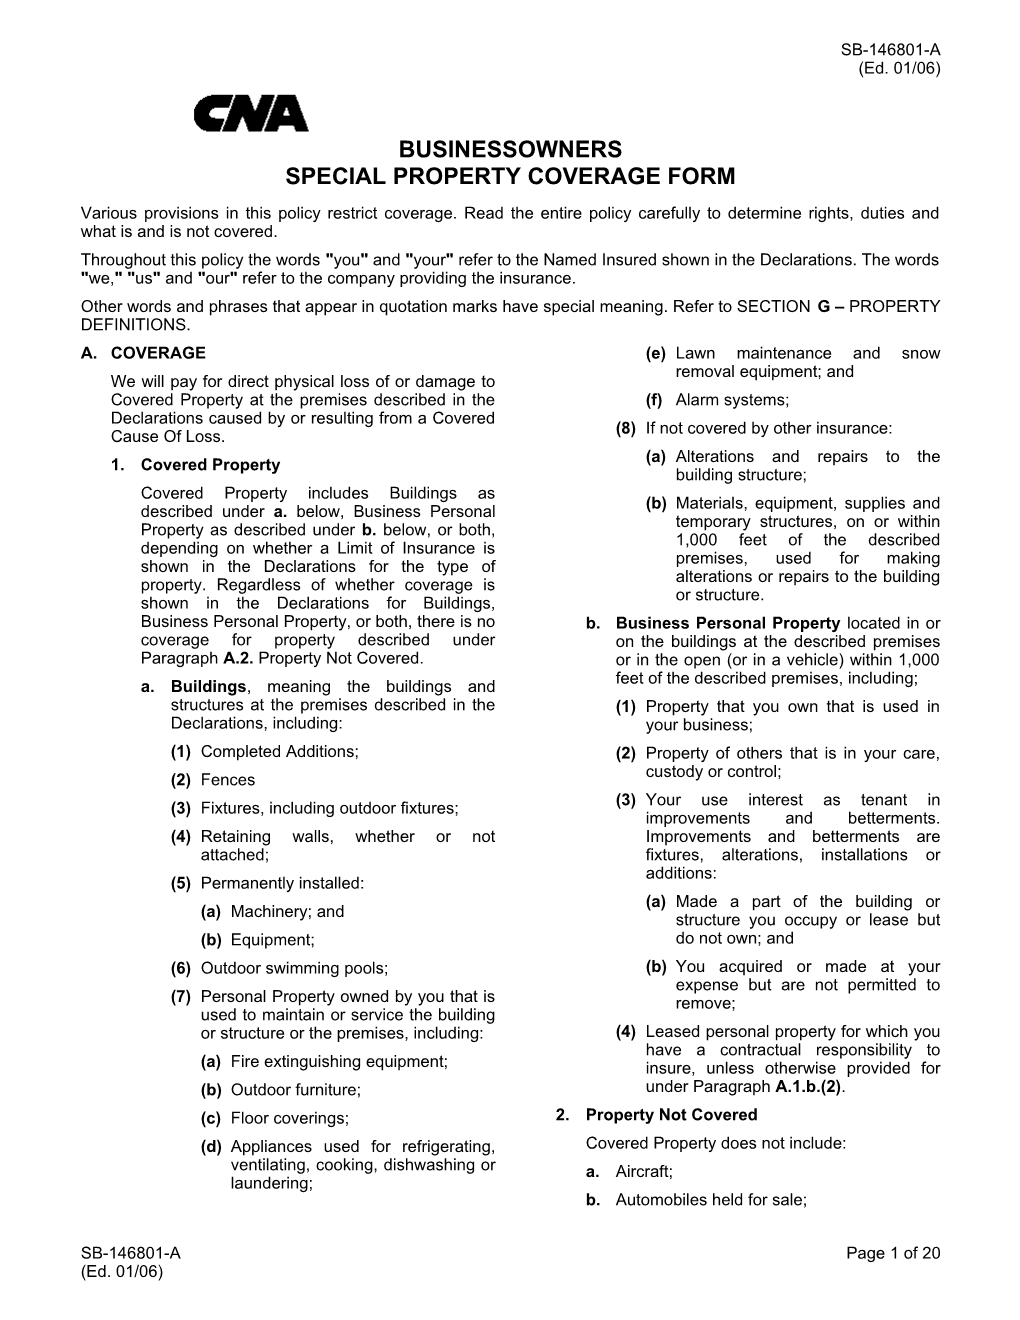 Businessowners Special Property Coverage Form